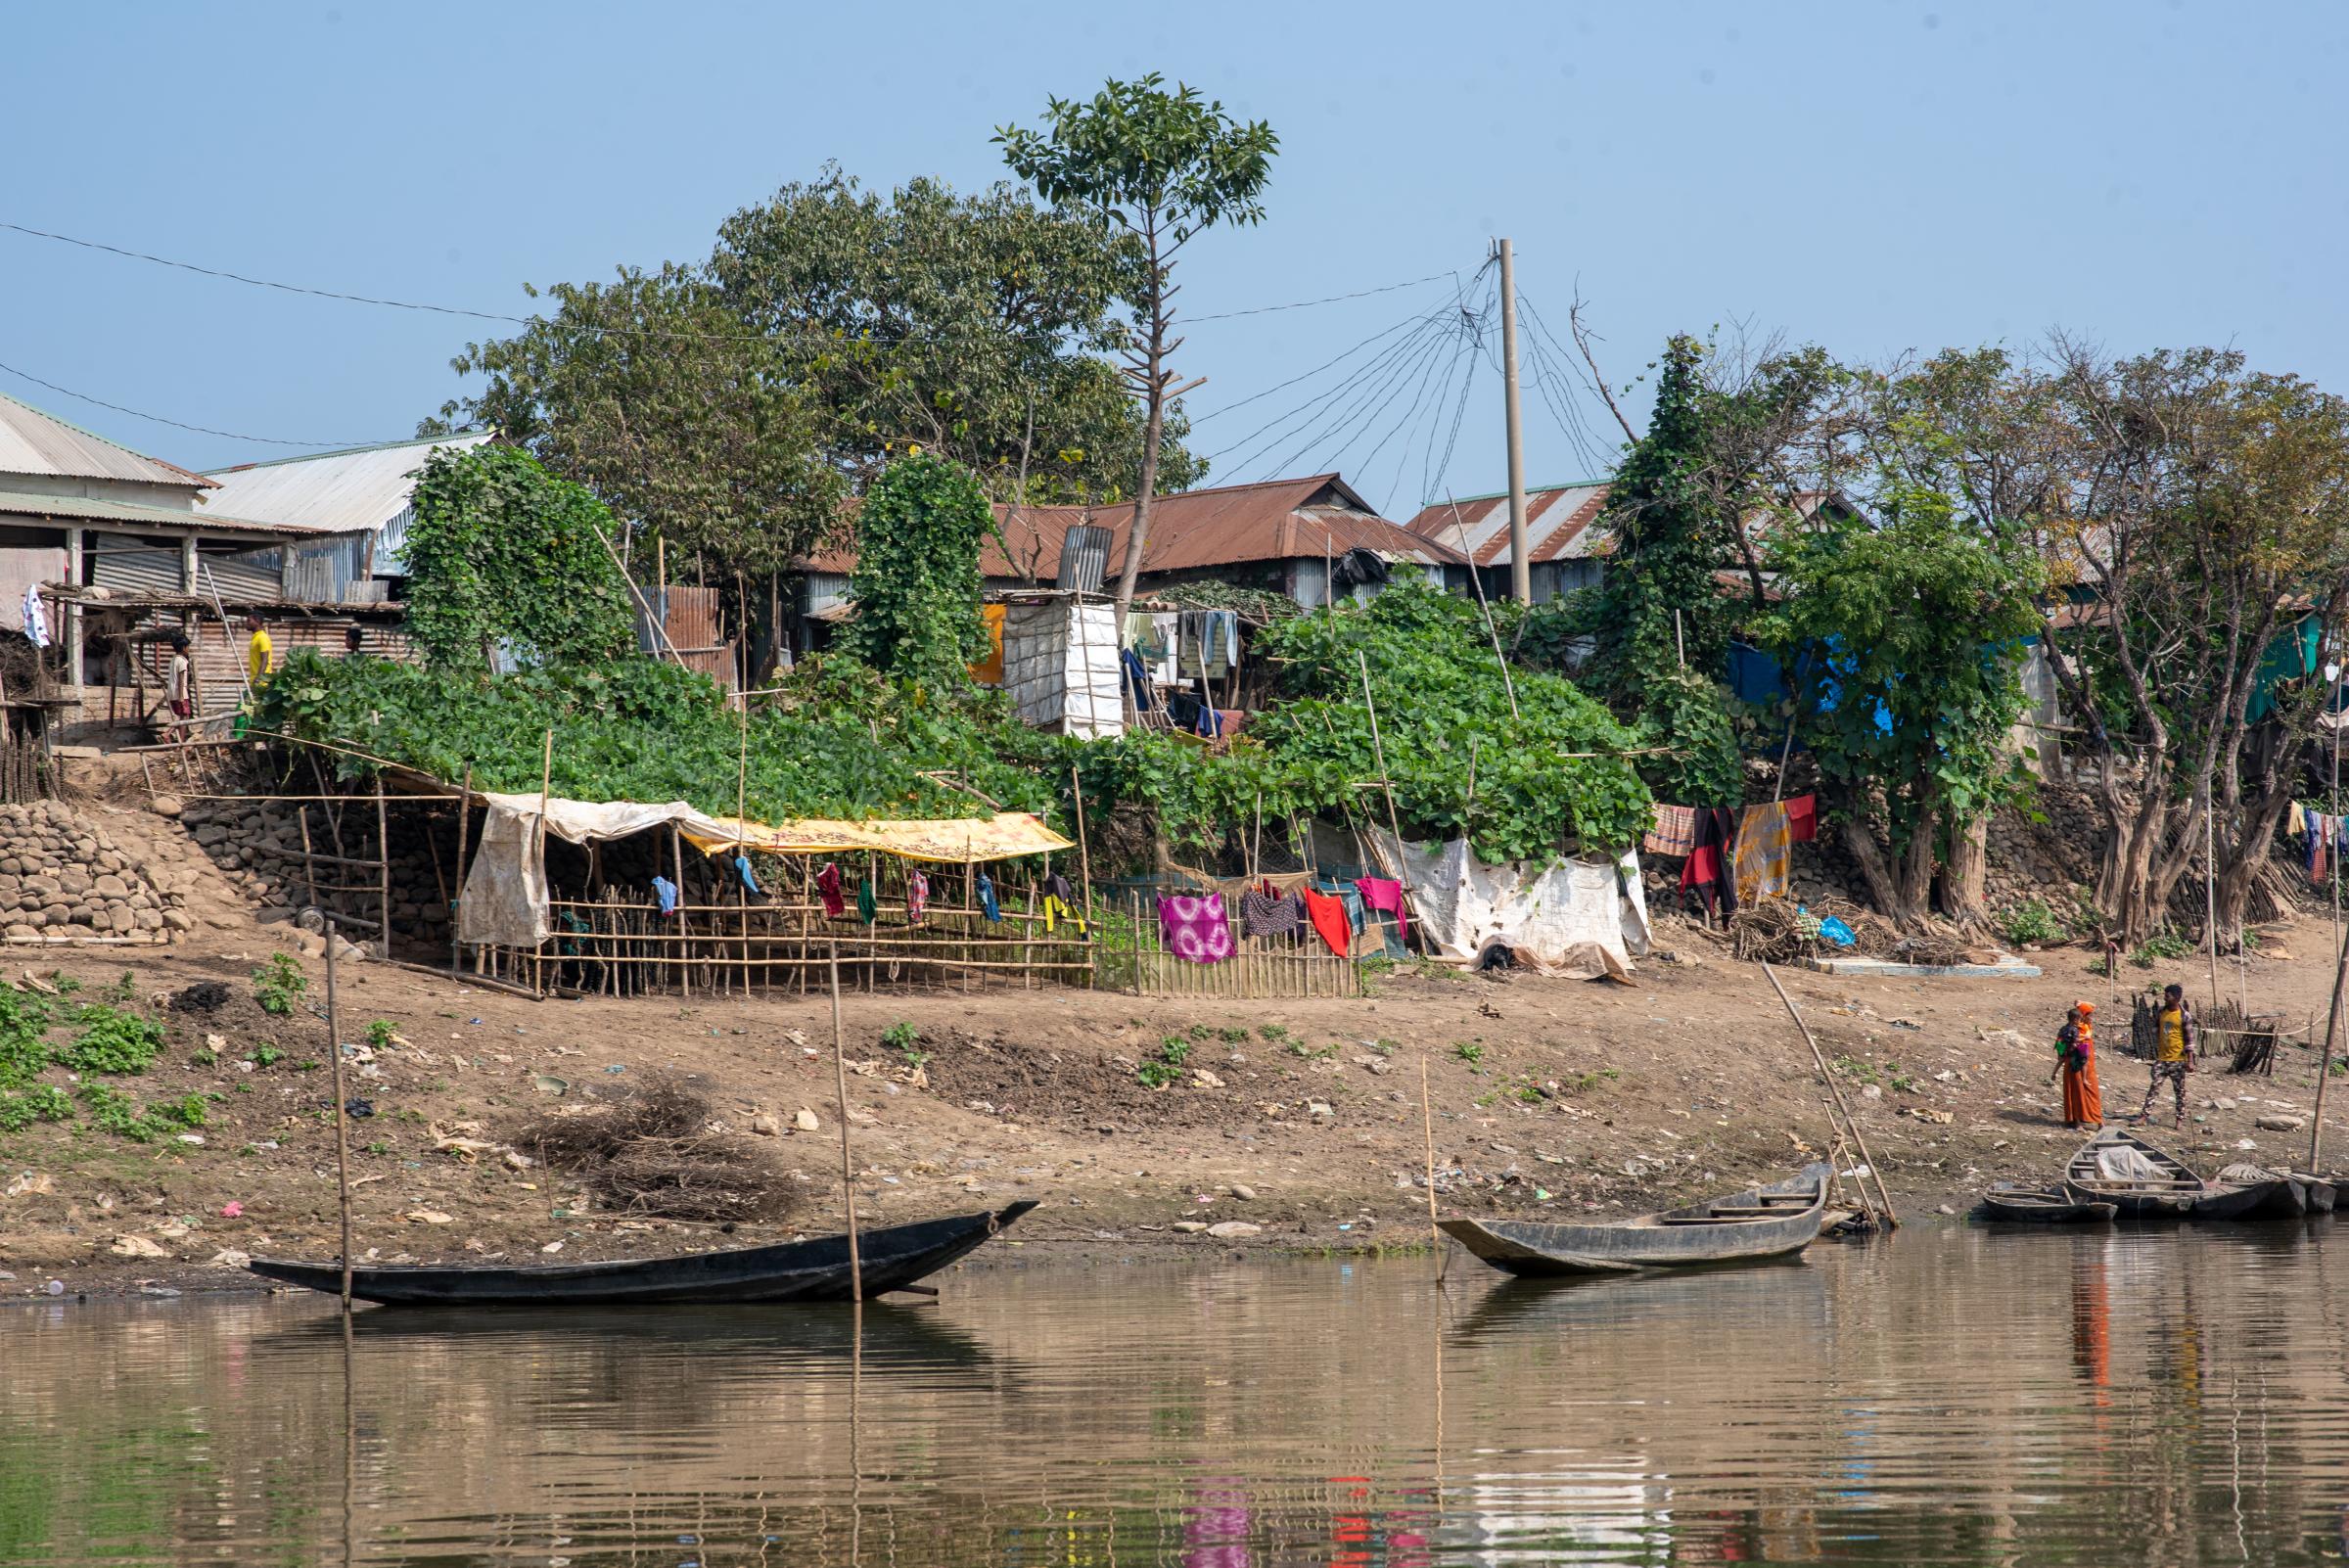 For NPR: Facing floods: What the world can learn from Bangladesh's climate solutions